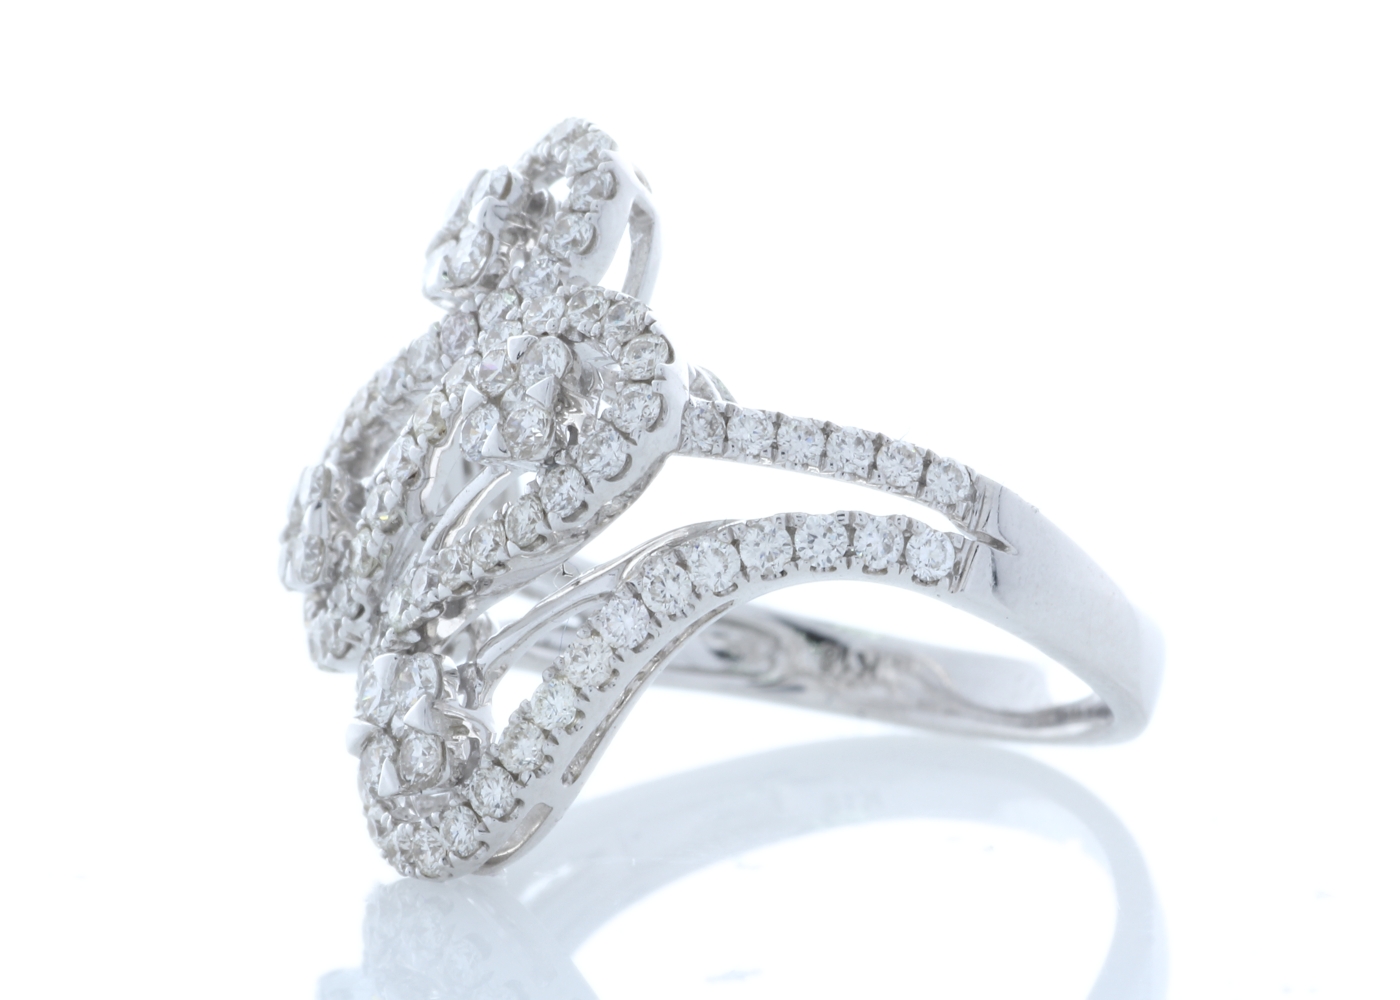 18ct White Gold Fancy Cluster Diamond Ring 1.15 Carats - Image 3 of 5